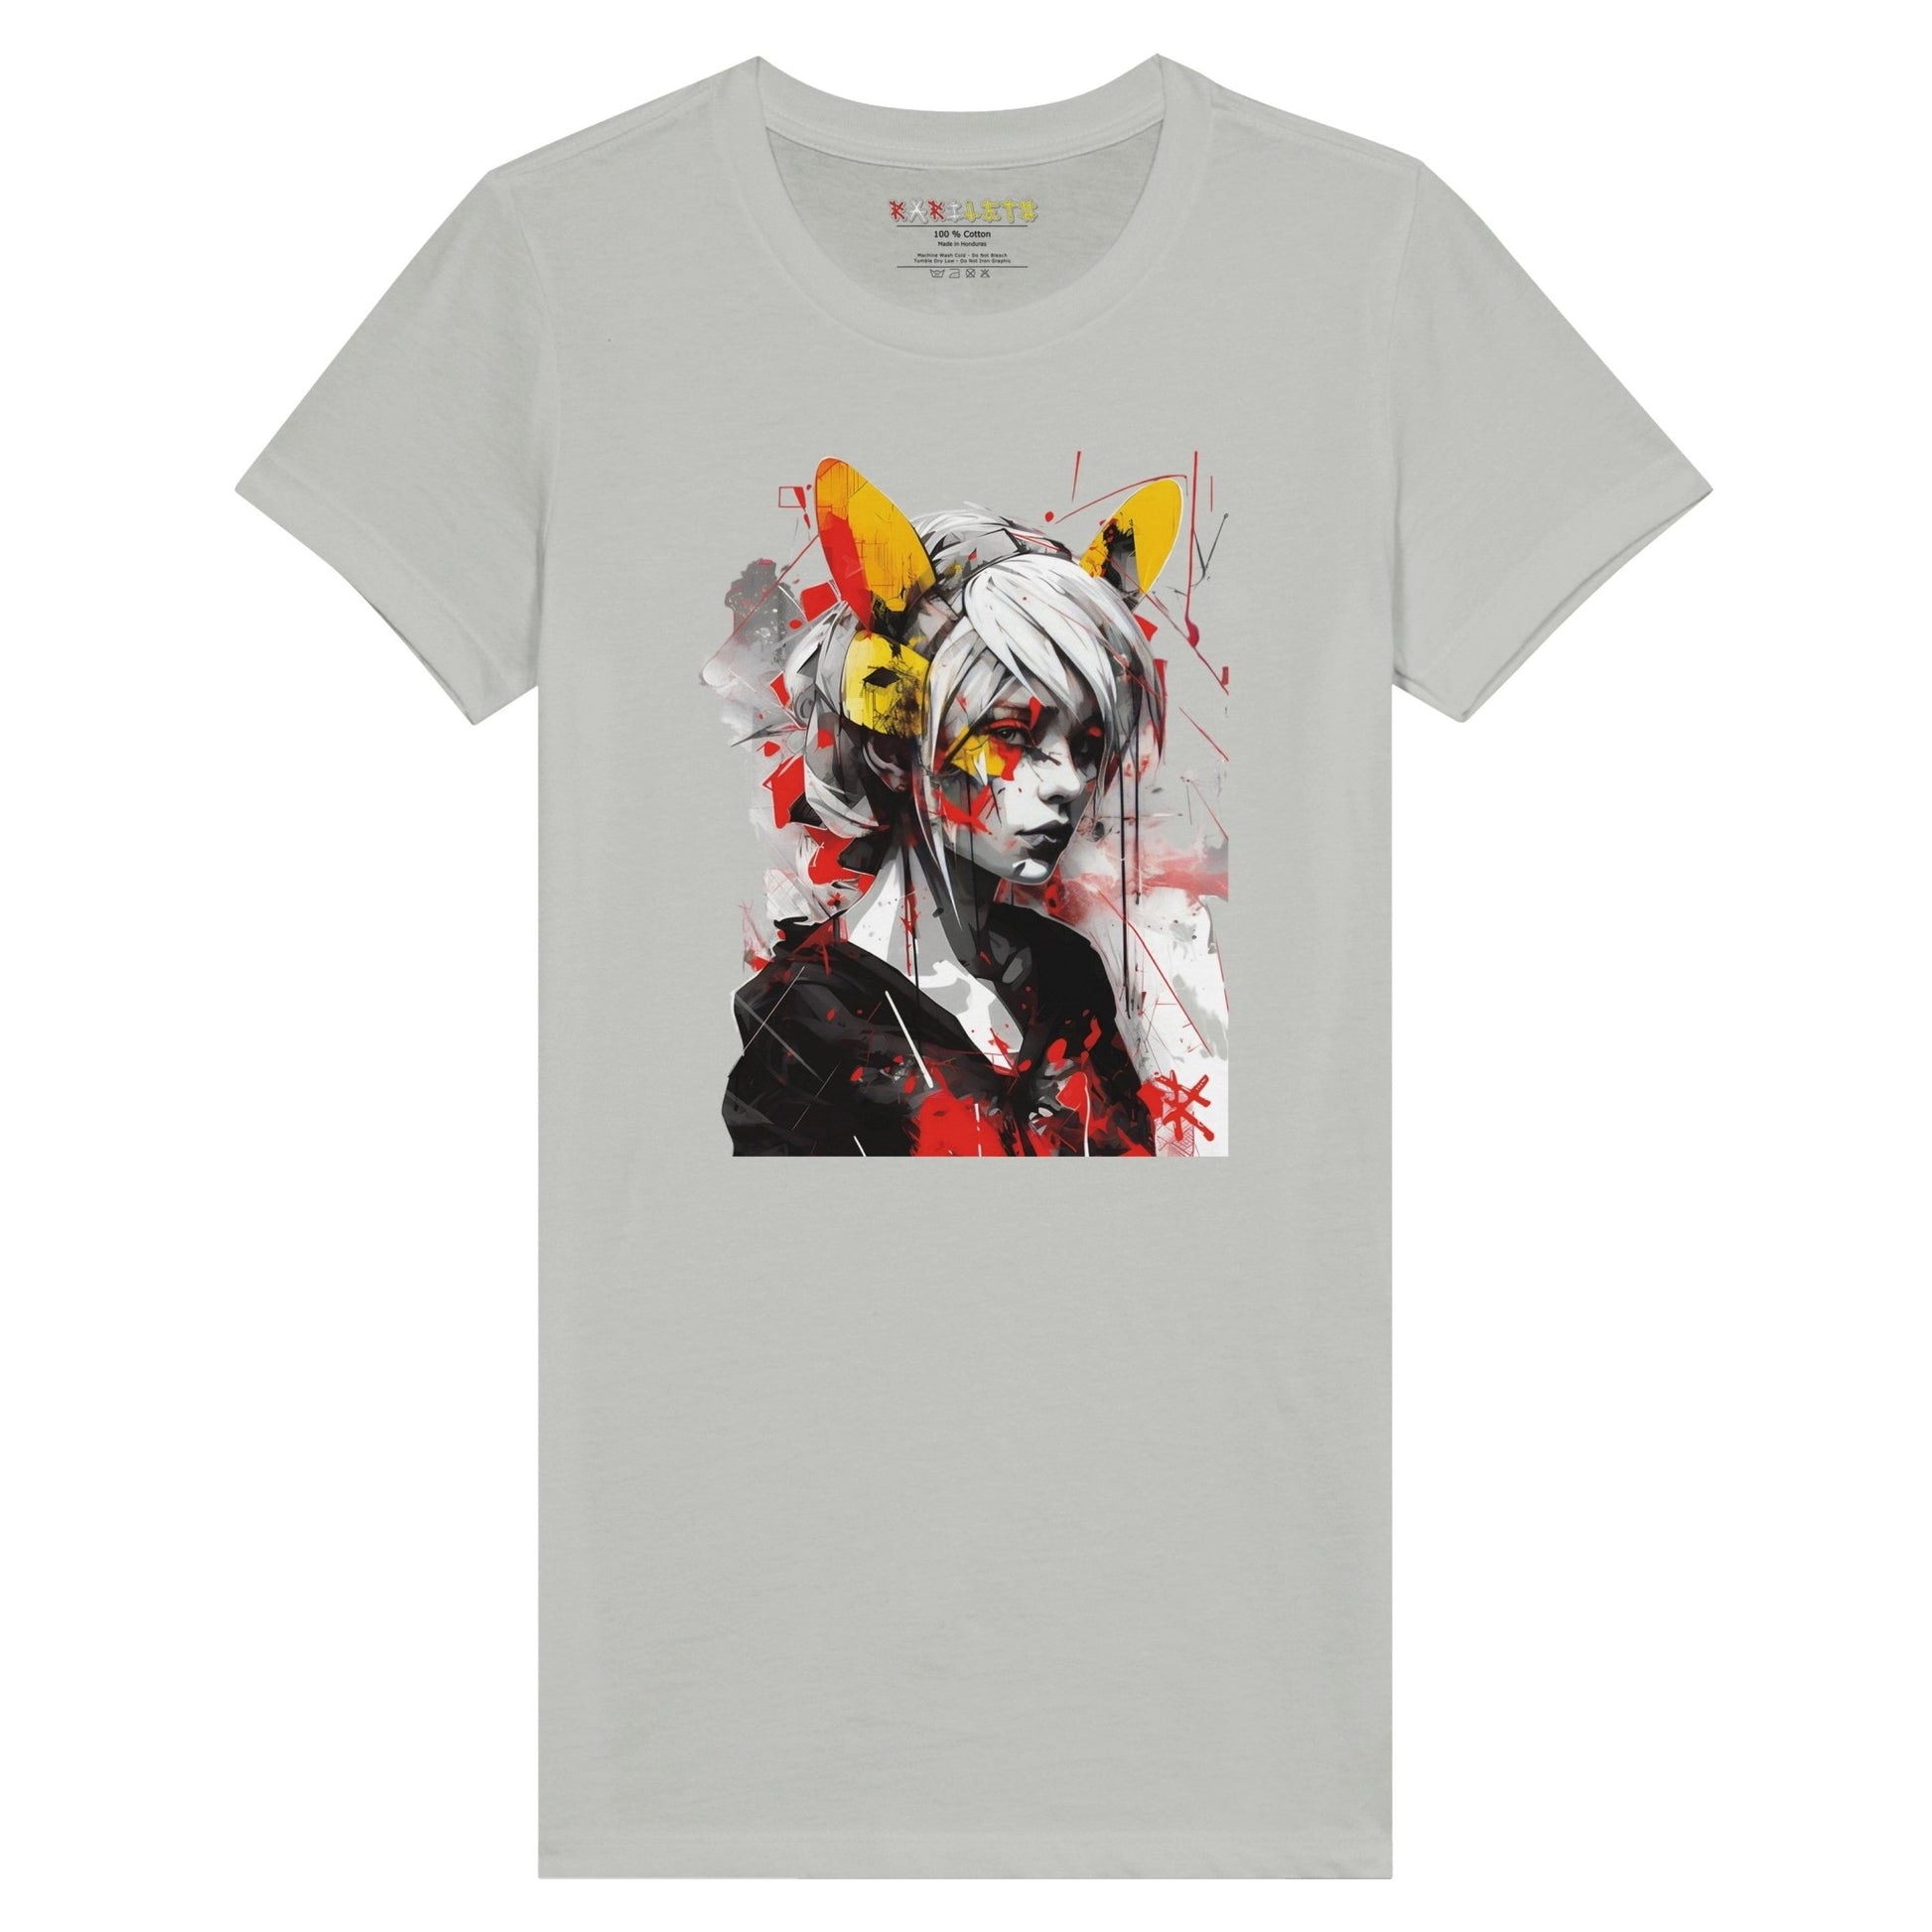 GIRL WITH CAT EARS Premium Tee - Rarileto t shirts - Silver - S